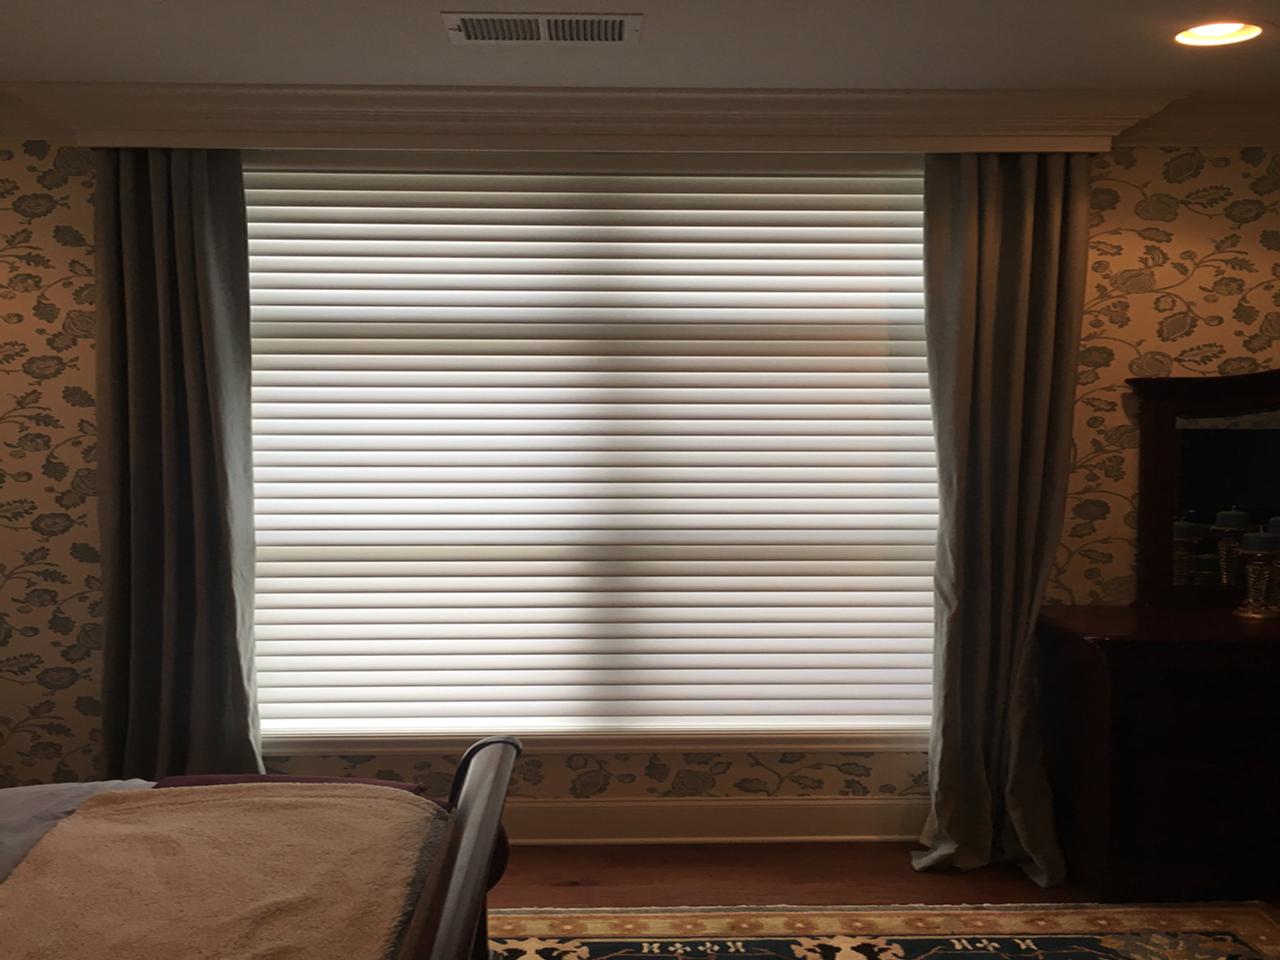 Double window with blinds in a bedroom